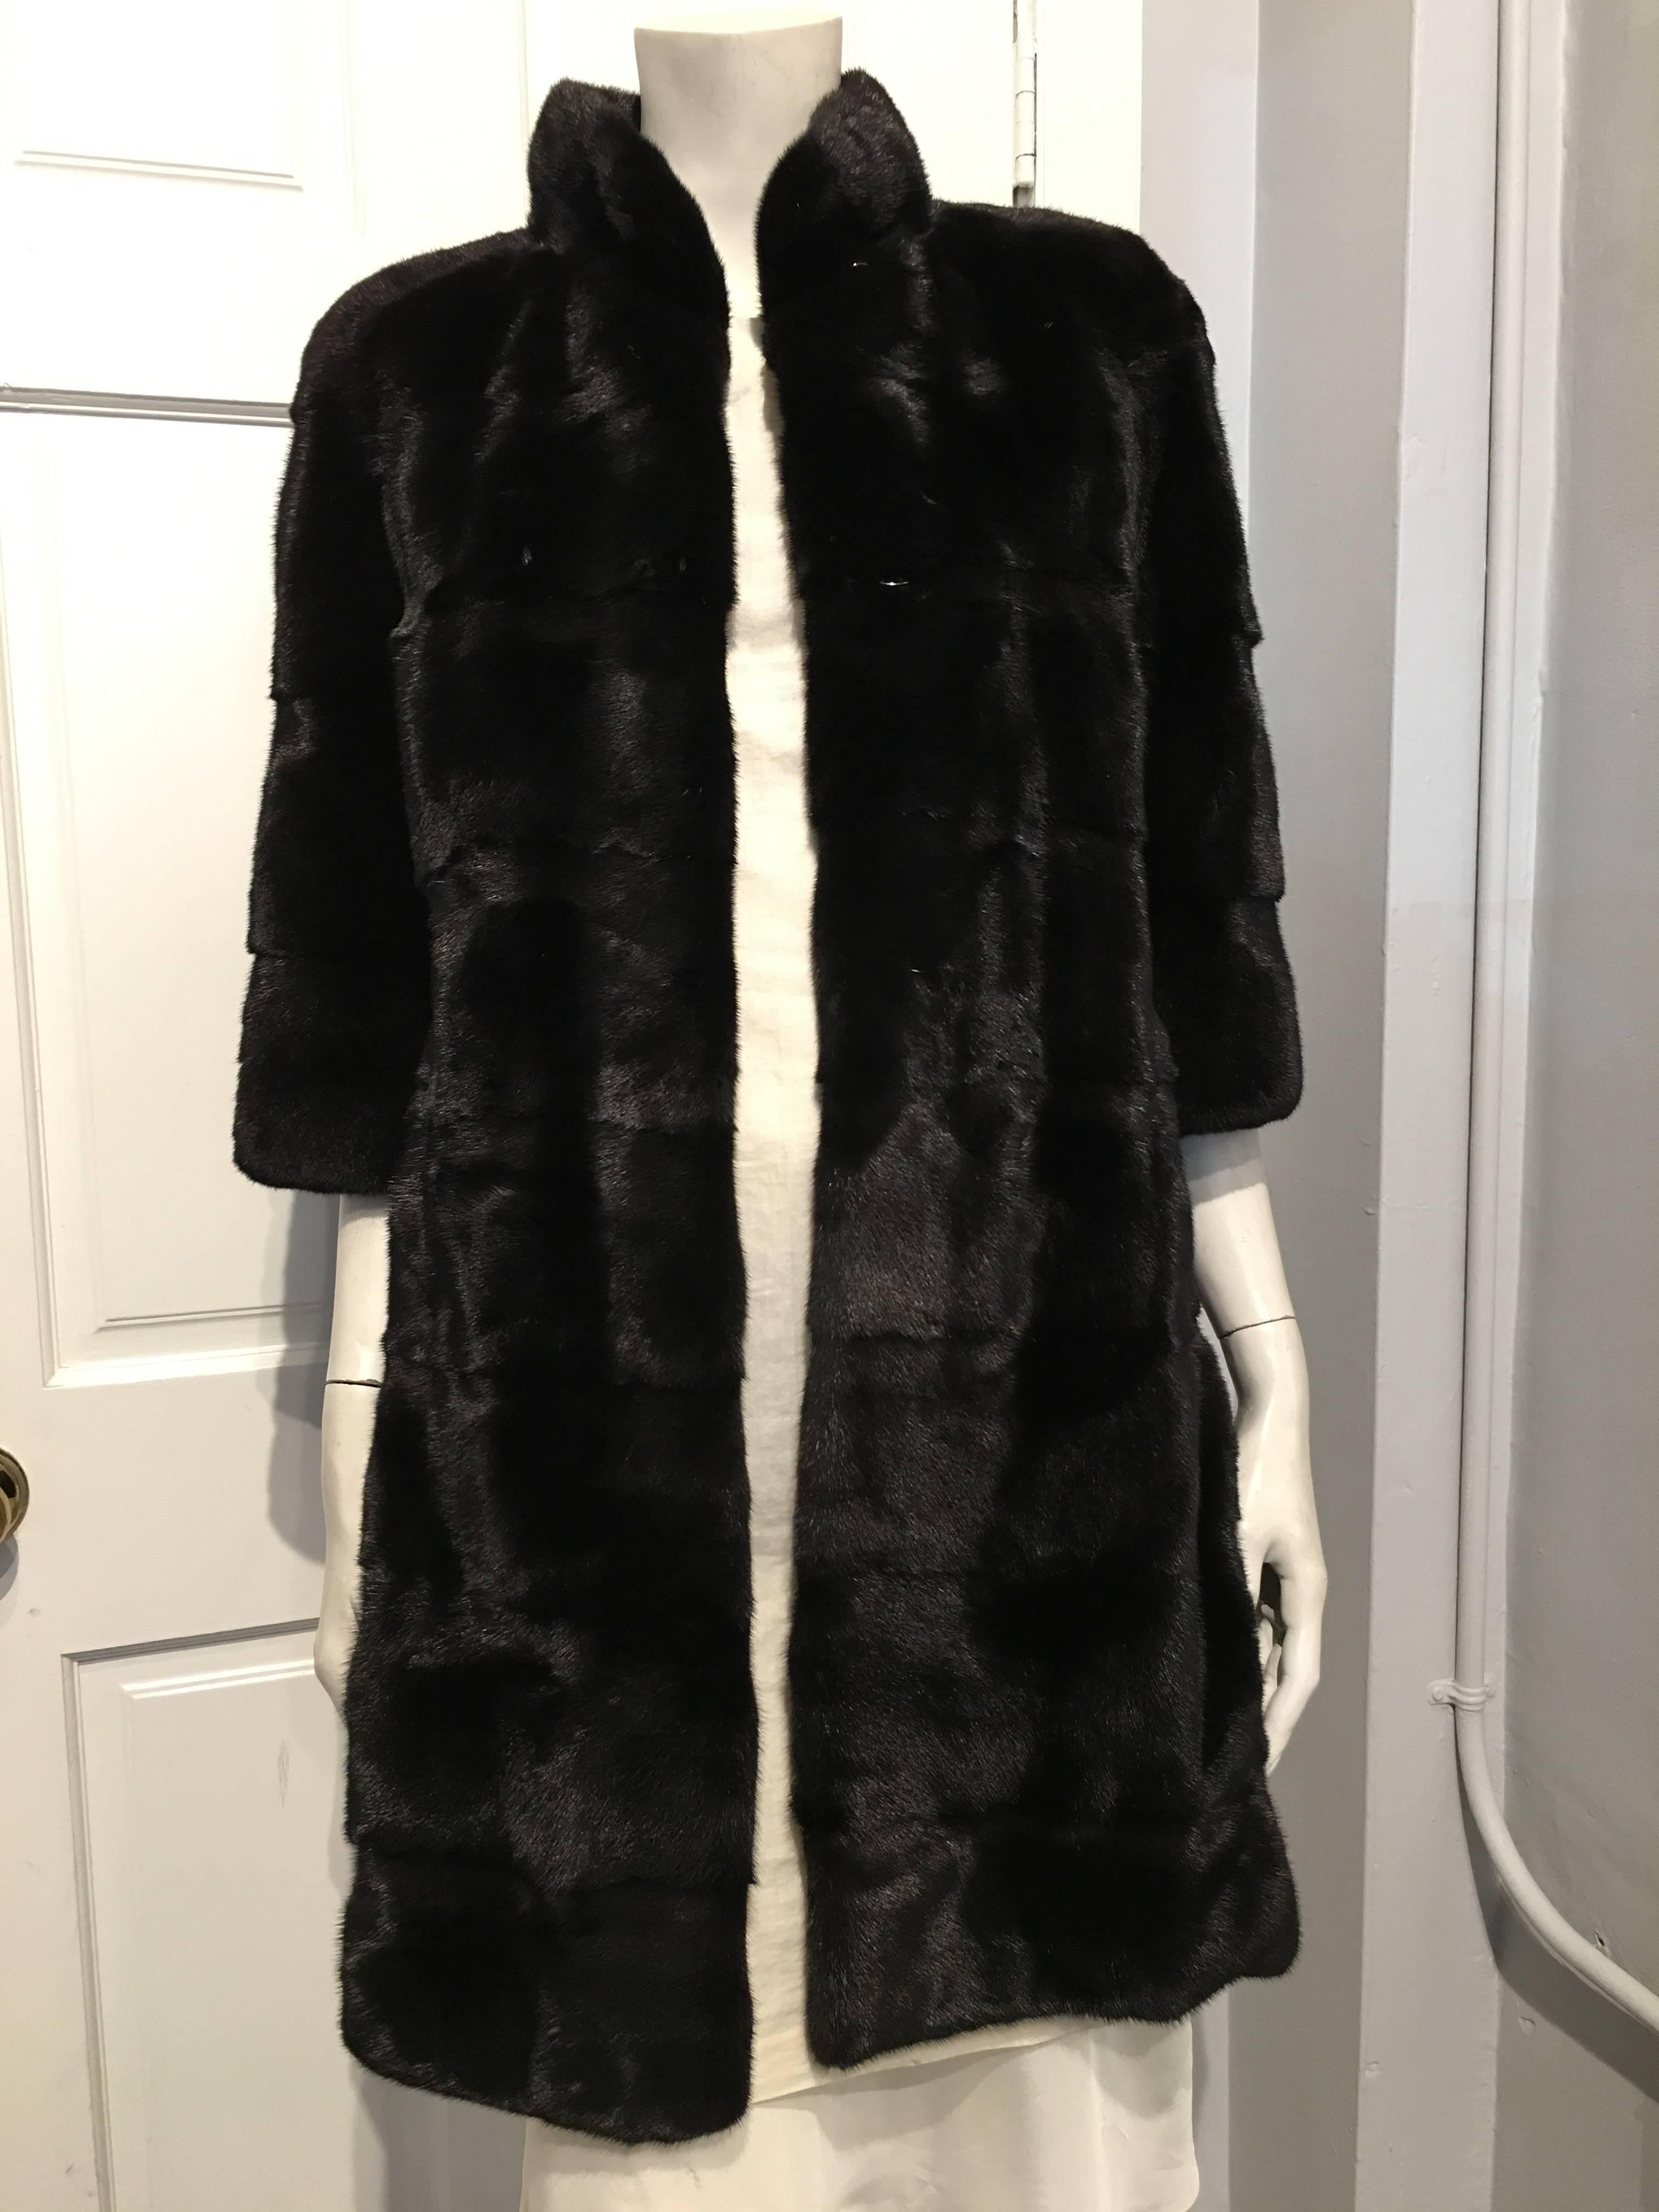 Elegant Fendi Blackglama mink knee length coat cut with horizontal pelts and 3/4 length sleeves. The coat has secure hook and eye closures, and a small stand up collar that closes at the nape of the neck. We assume it is a size 6, as the size tag